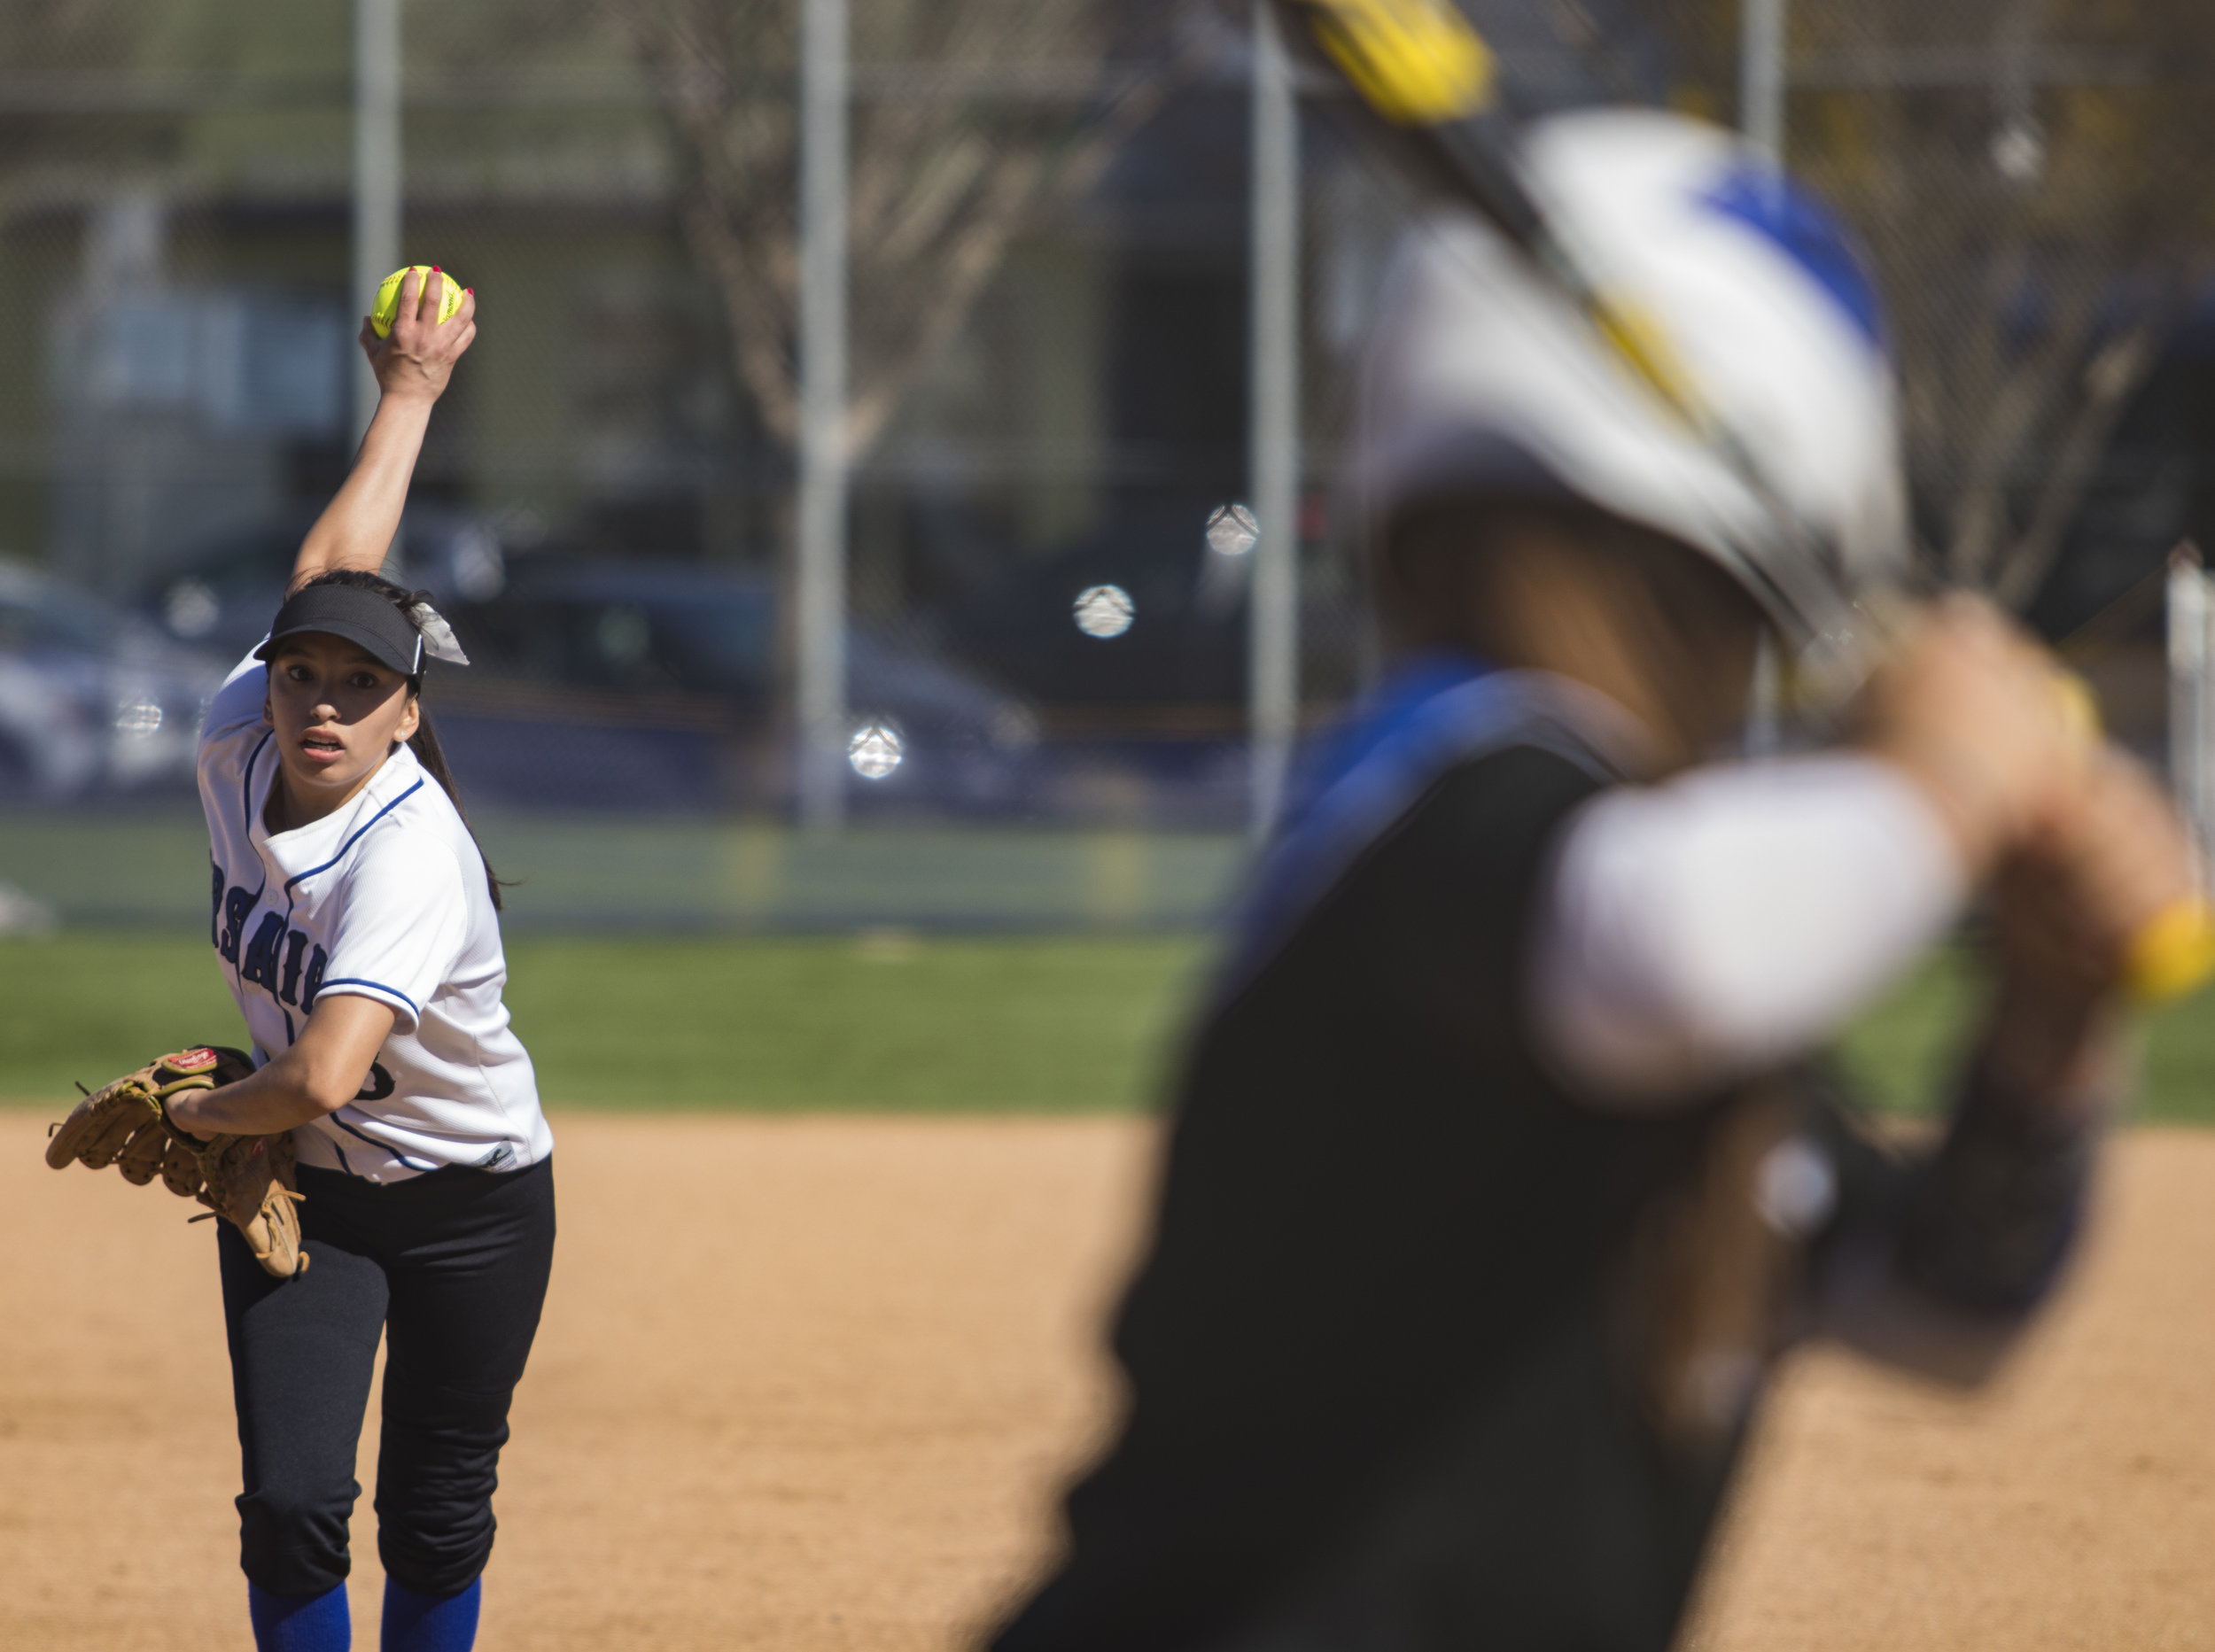  Ashley Nava pitching for The Santa Monca Corsair during Tuesday, March 27, 2018, game against the Allan Hancock Bulldogs at John Adams Middle School in Santa Monica, California. The Corsair fell 8-1 to the Bulldogs and are now 1-4 in their conferenc